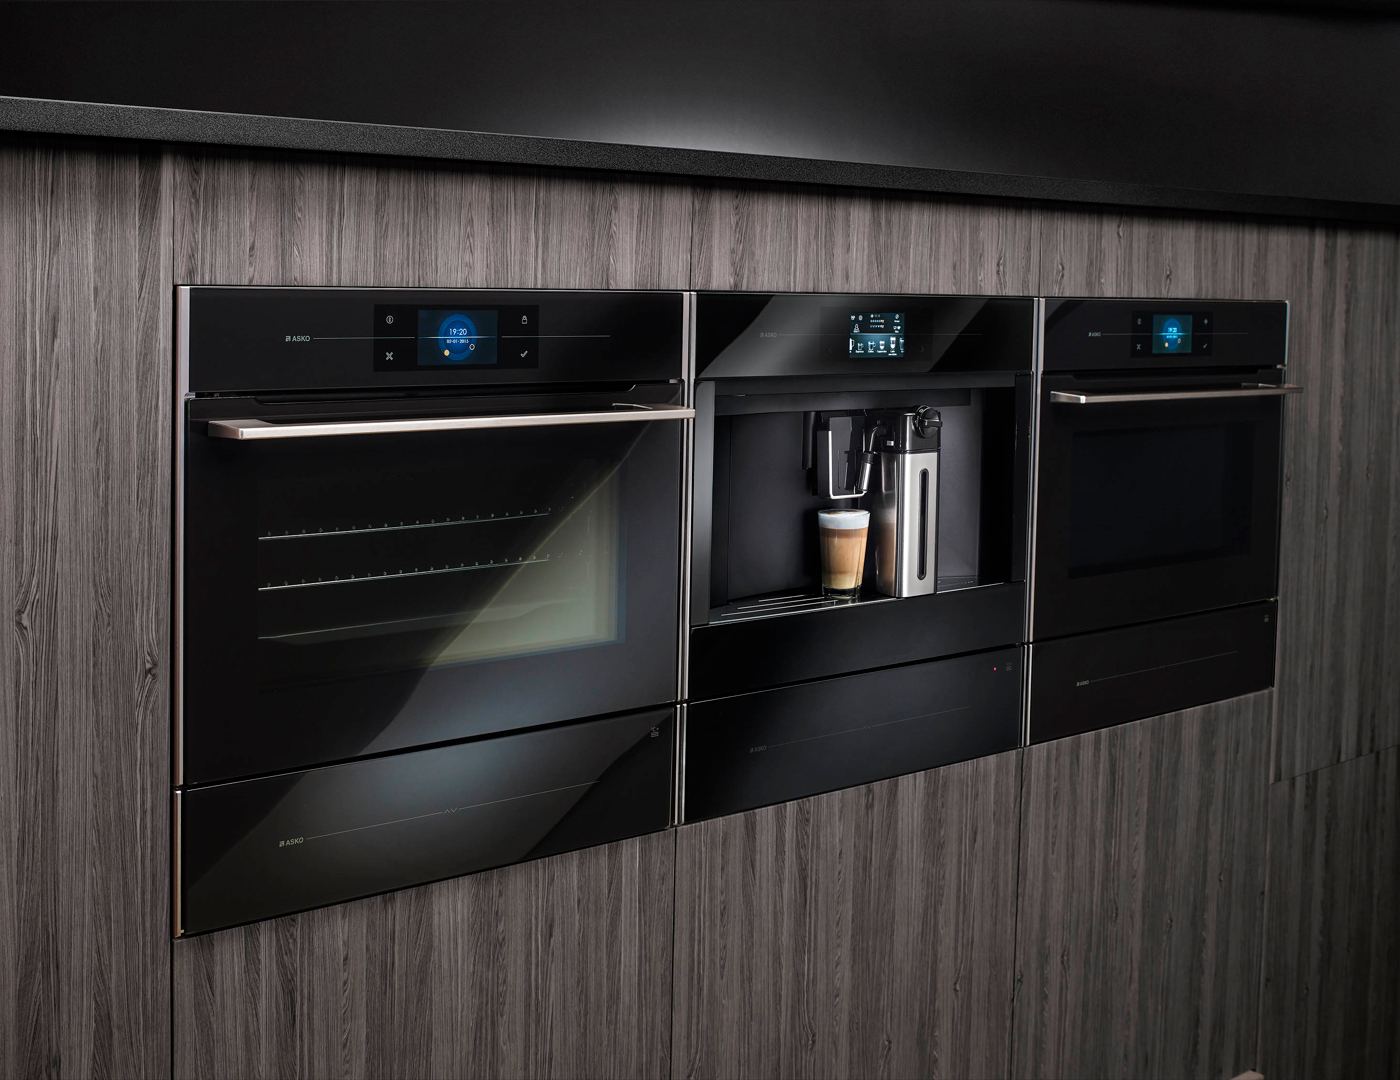 built in kitchen appliances in a brown niche in kitchen wall cabinets